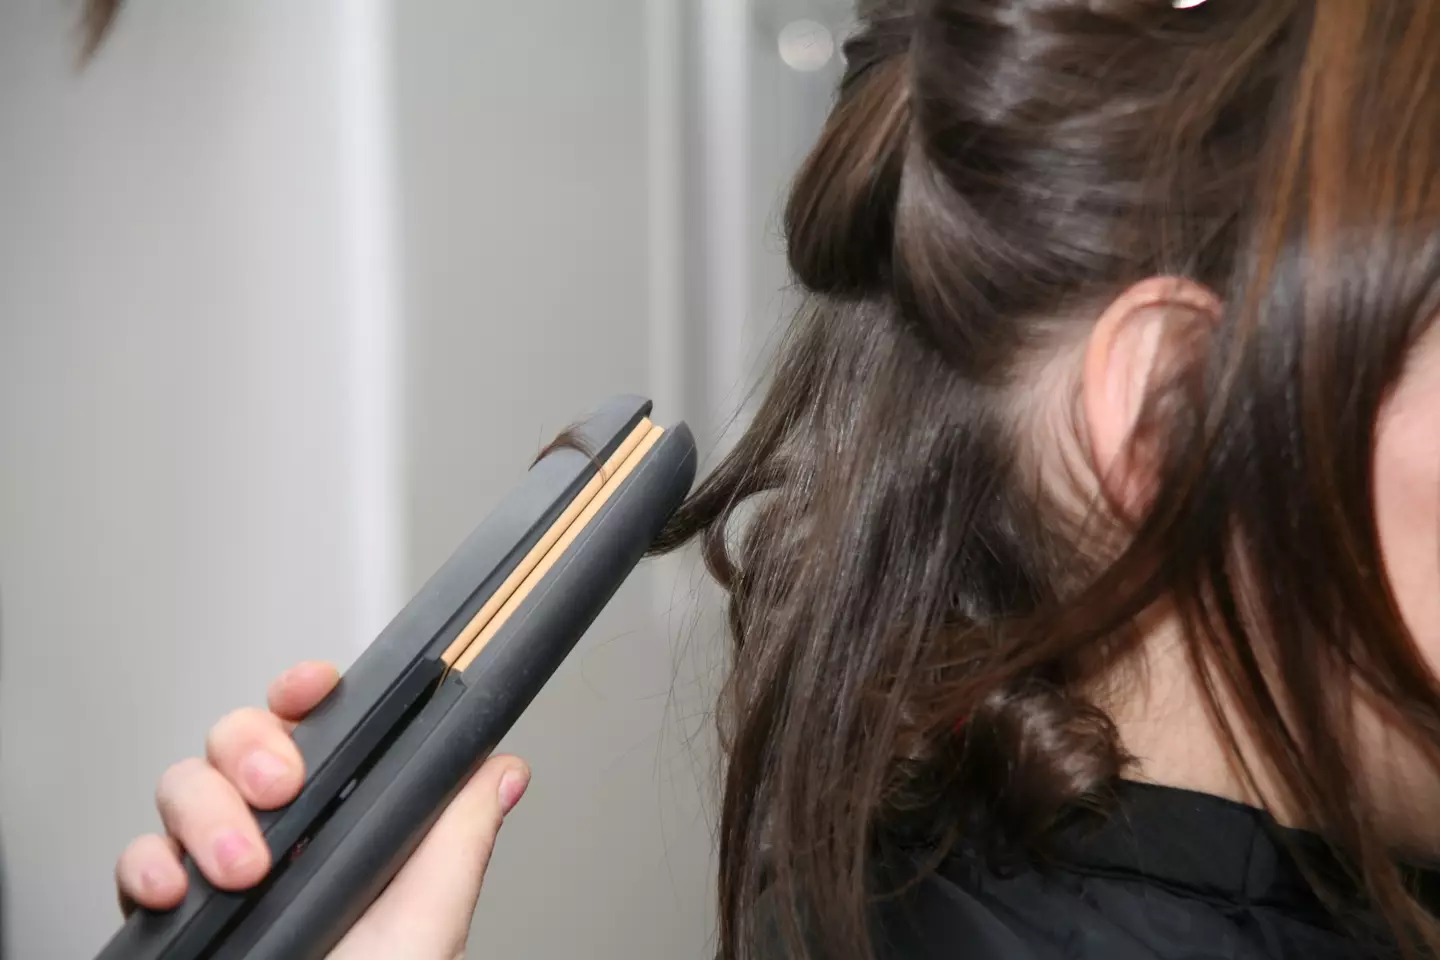 Hair experts are warning parents not to use straighteners to kill lice.